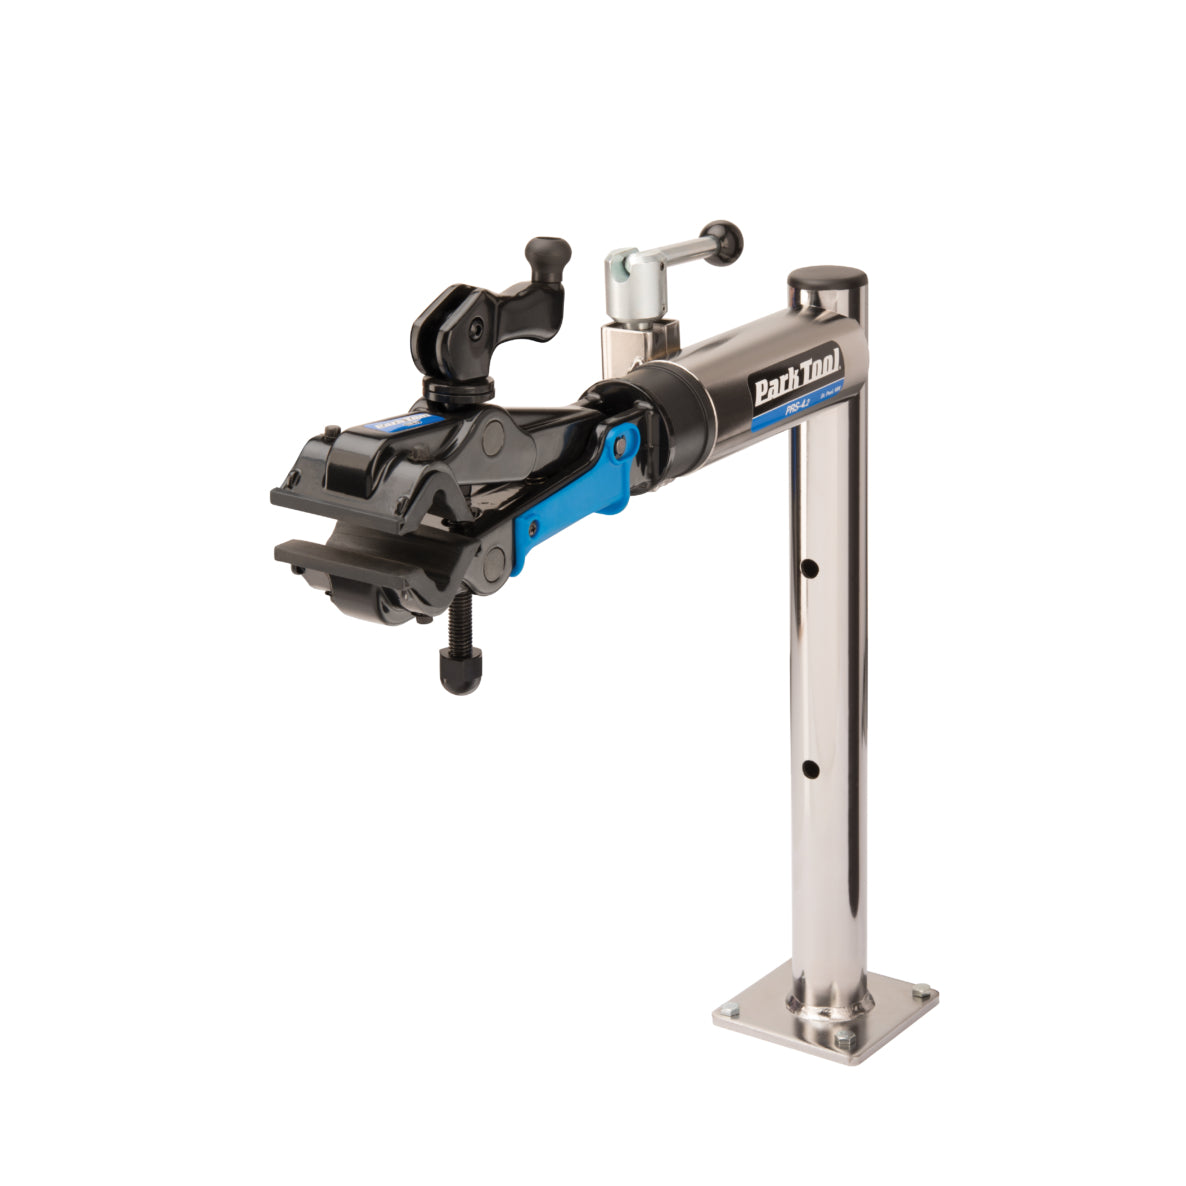 Park Tool PRS-4.2-2 Deluxe Bench Mount Repair Stand With Micro-Adjust Clamp - The Bikesmiths